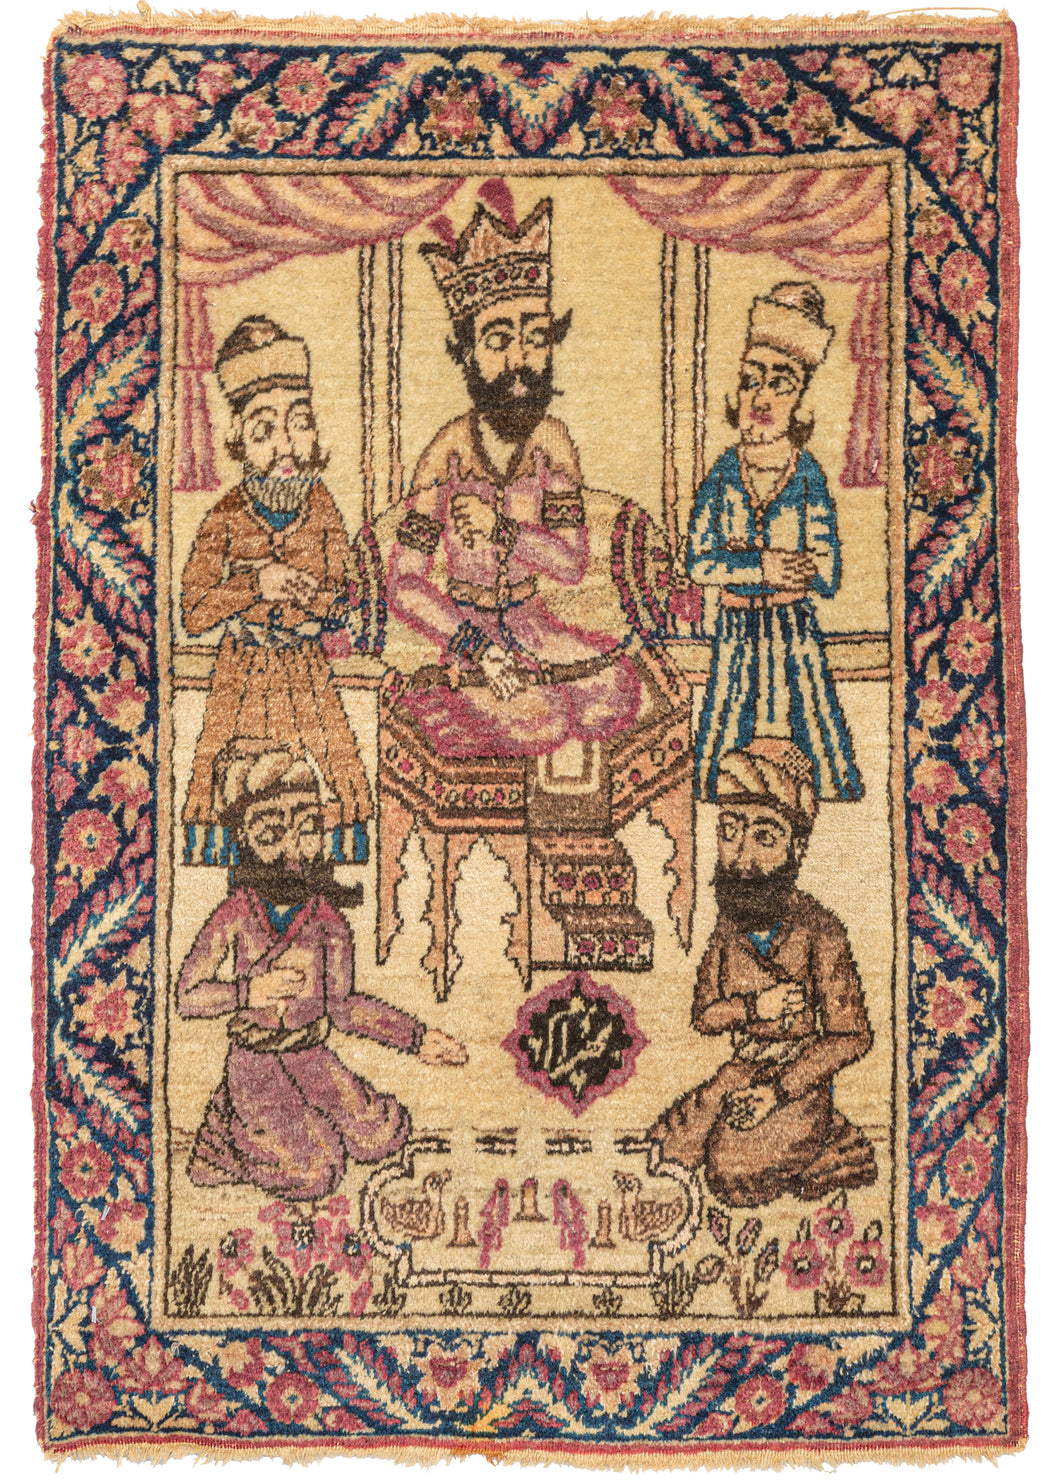 19th century Lavar Kerman pictorial rug depicting a Persian king or Shah on a throne surrounded by attendants or advisors. Near the bottom of the composition birds and fish can be seen. These images are sometimes utilized to express the shah's domain over both the earth (fish) and the sky (birds). The word 